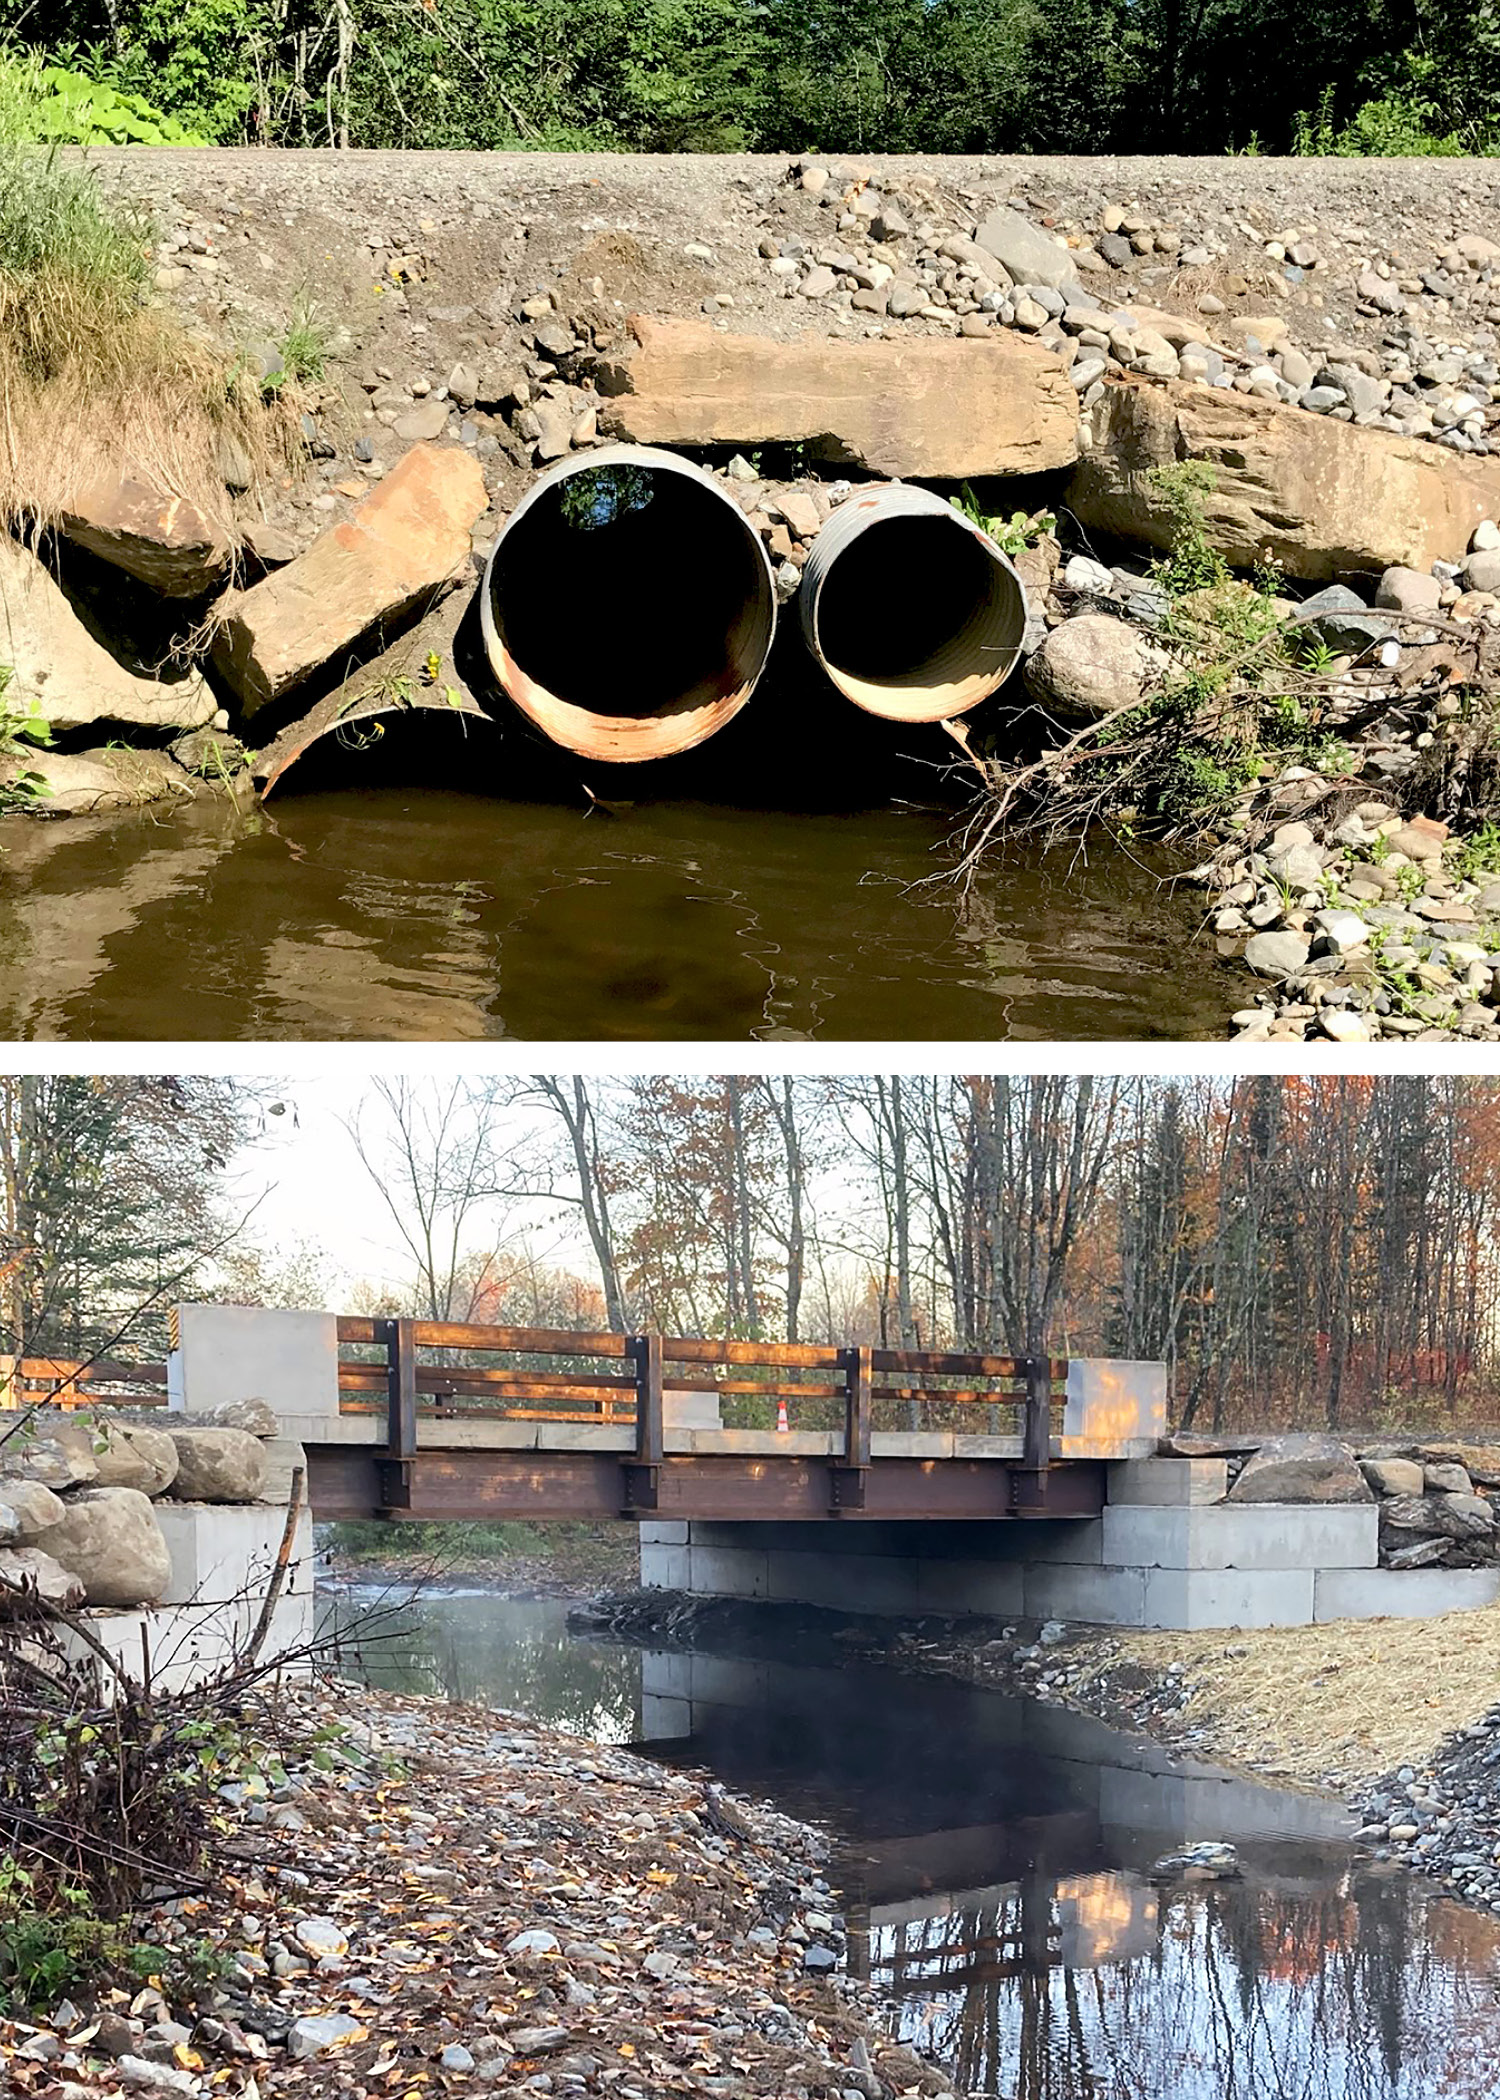 Two Images. Top: Perched culvert with a road passing over. Bottom: Newly constructed bridge in a wooded area. 